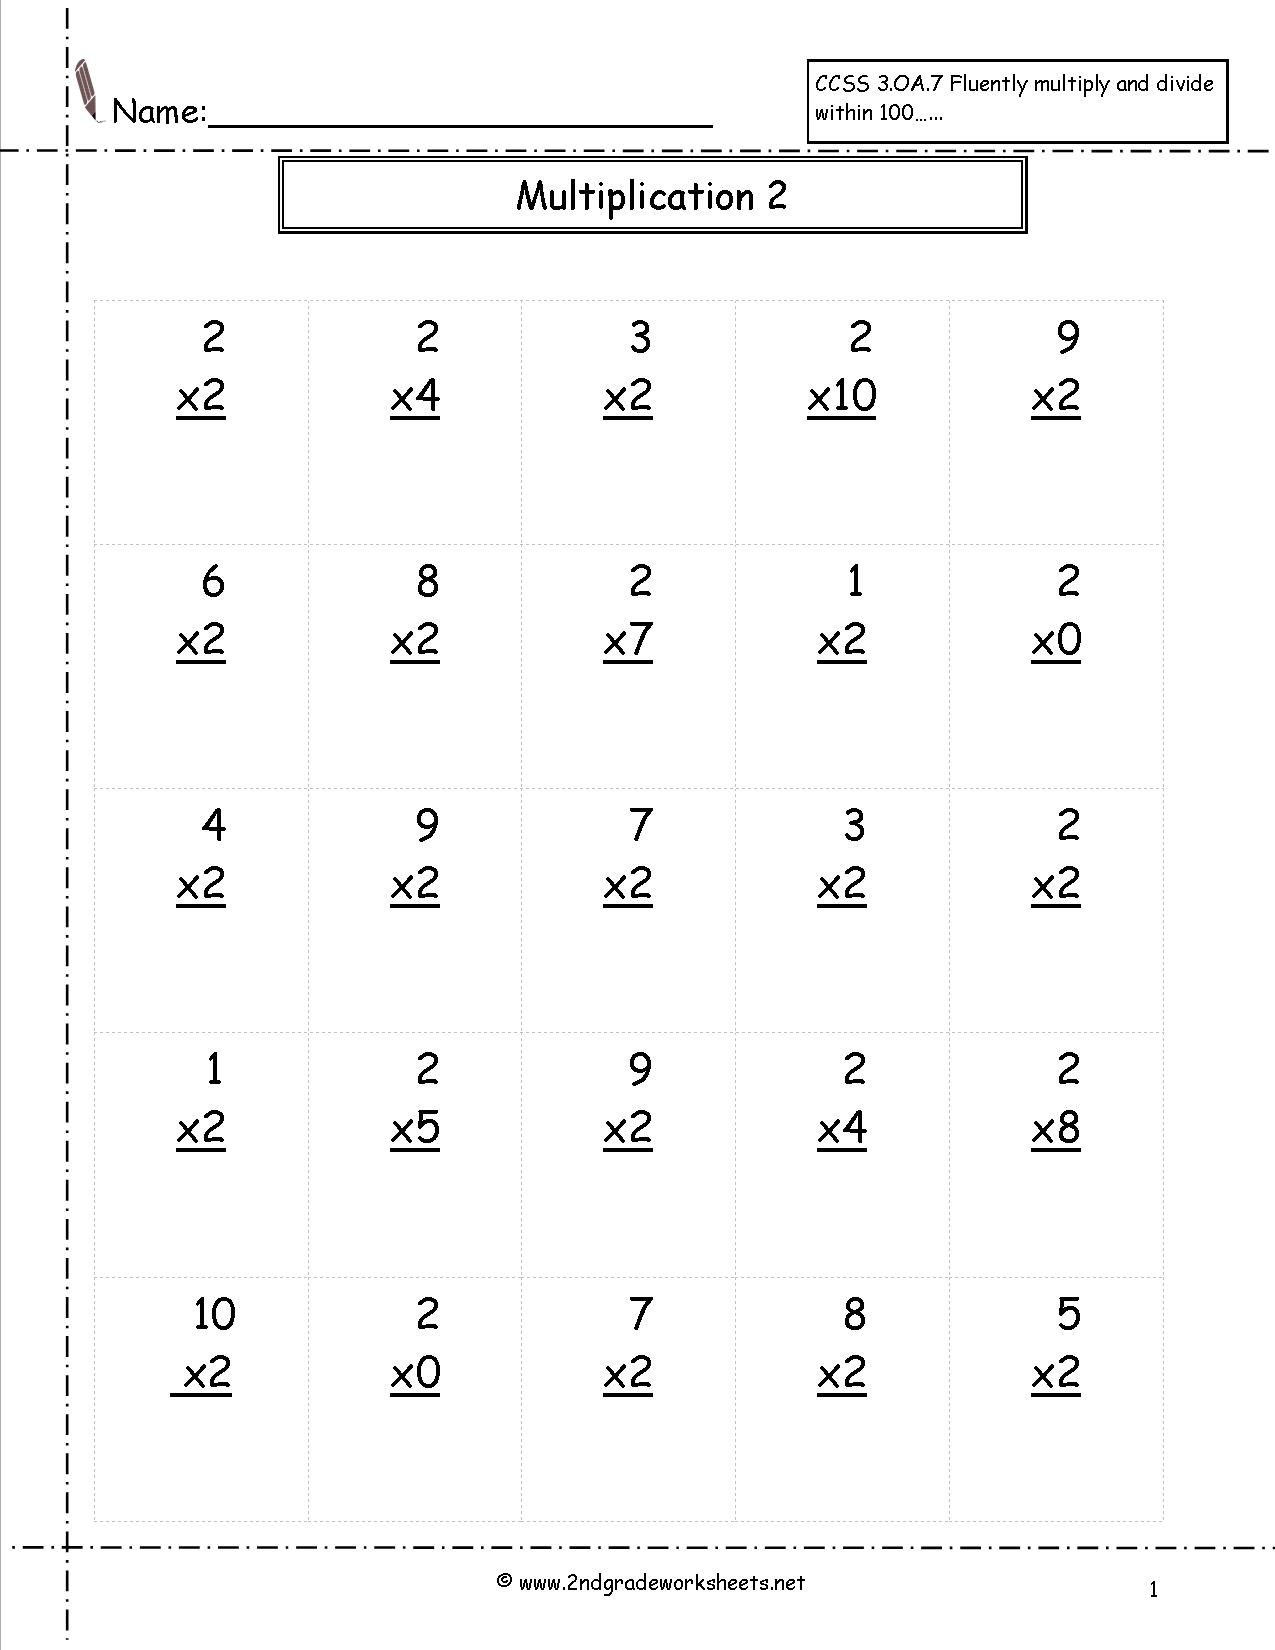 Multiplication Worksheets And Printouts regarding Multiplication Worksheets 6 Facts